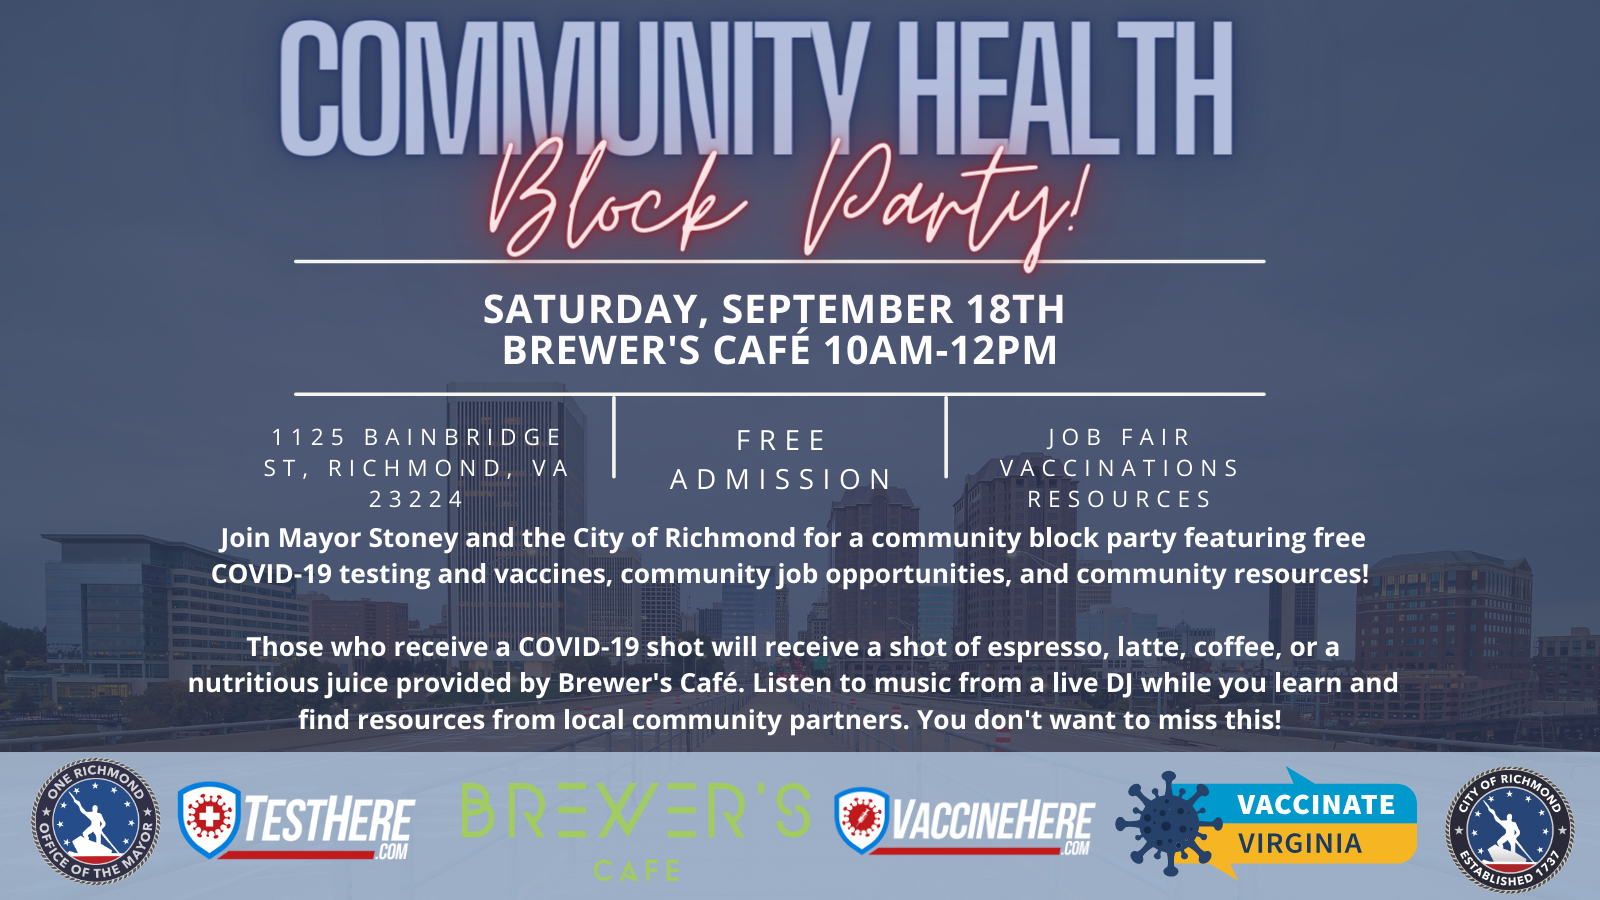 Information on the Community Health Block Party 